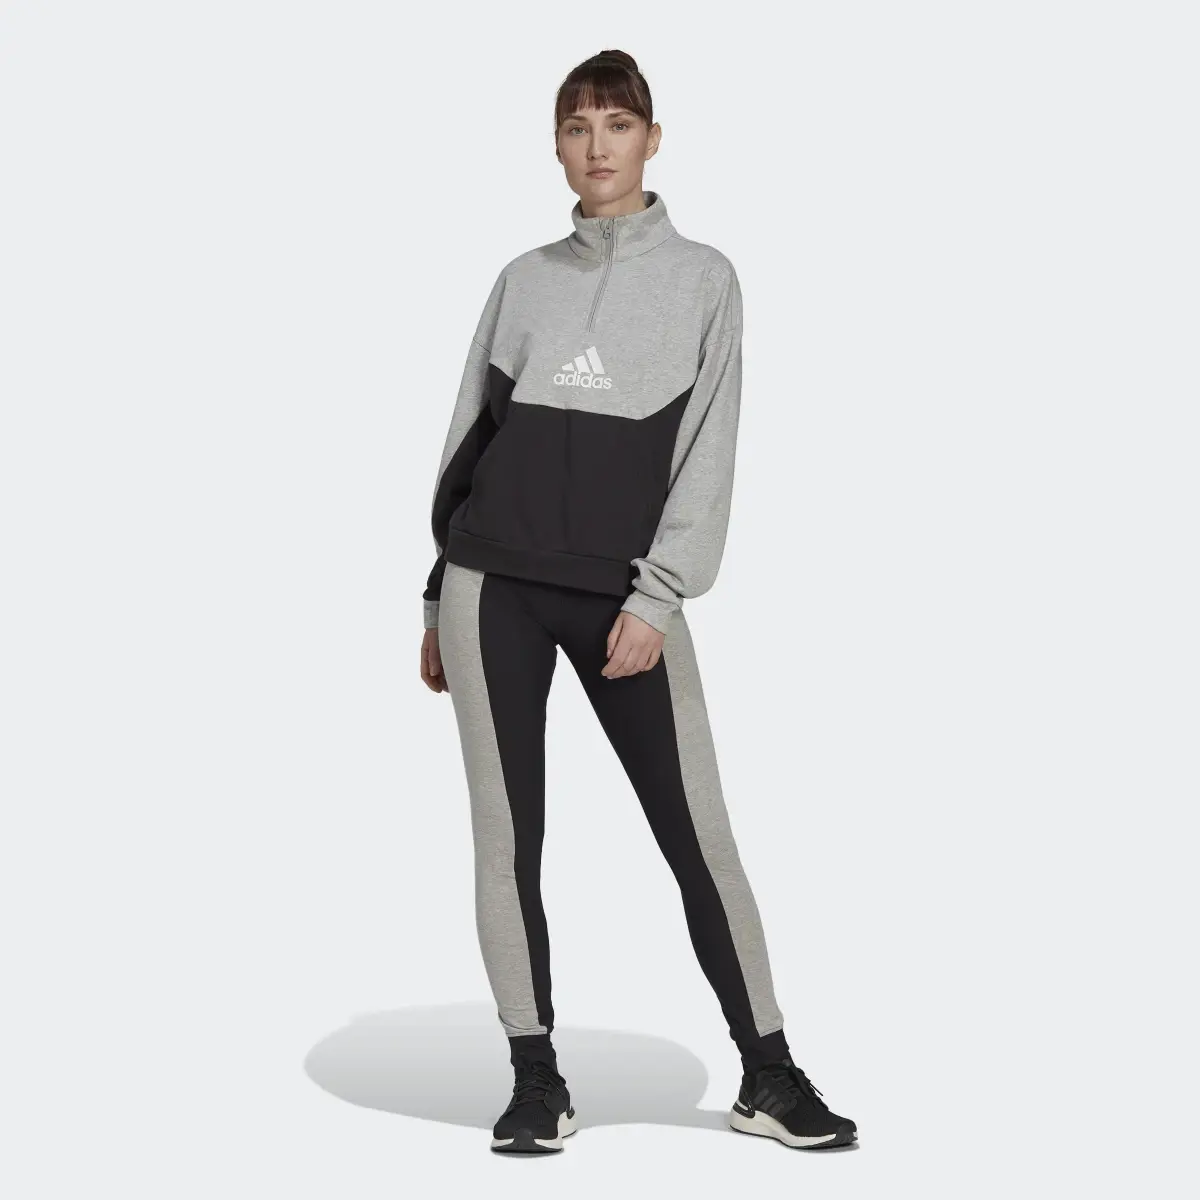 Adidas Half-Zip and Tights Tracksuit. 2